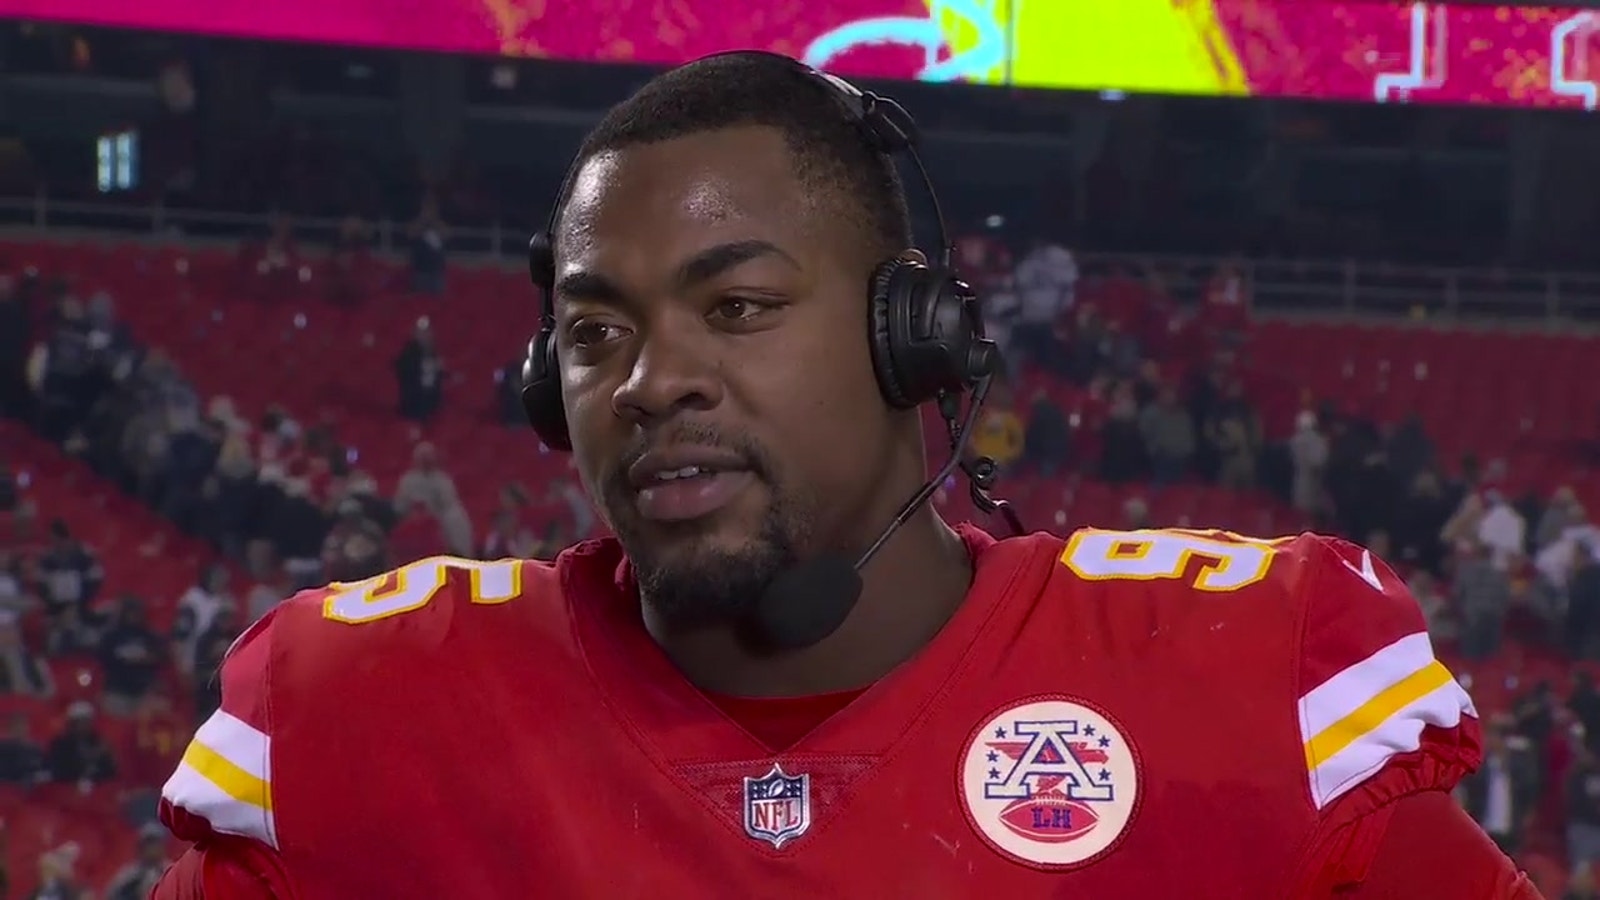 Chris Jones on Chiefs' stellar defensive performance: 'We played lights out'